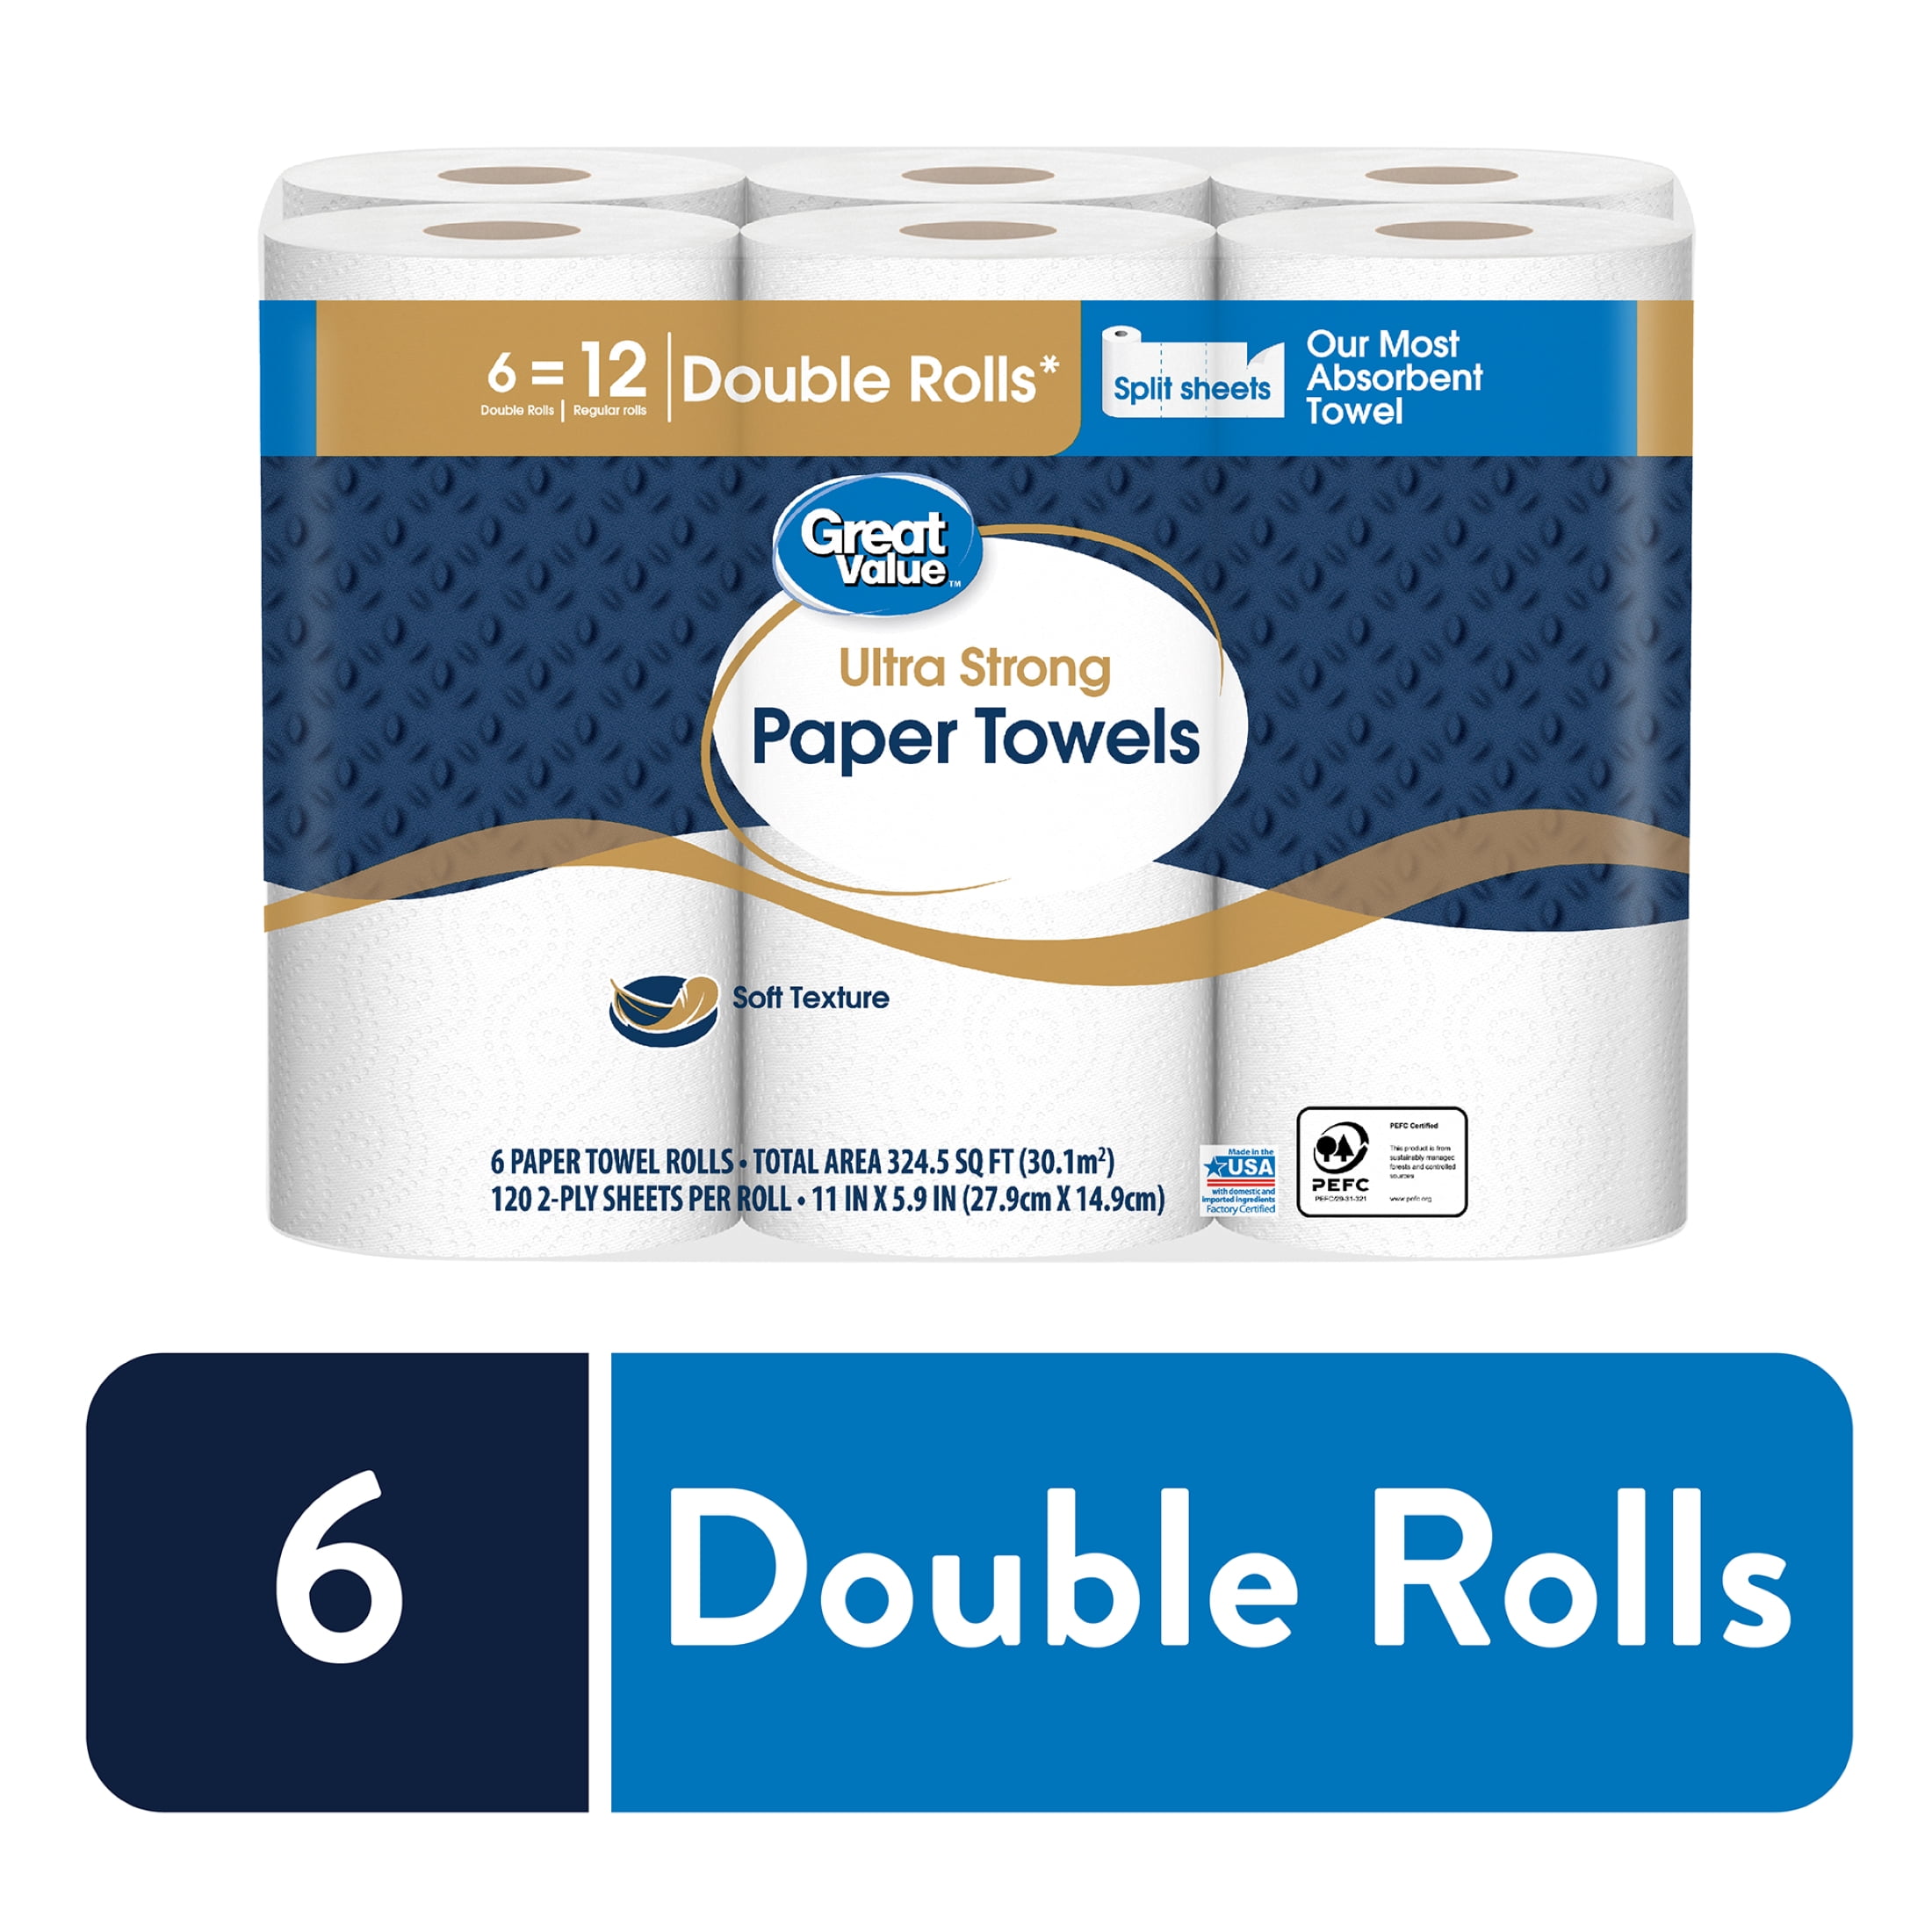 Great Value Ultra Strong Paper Towels Split Sheets 6 Double Rolls Soft Texture 